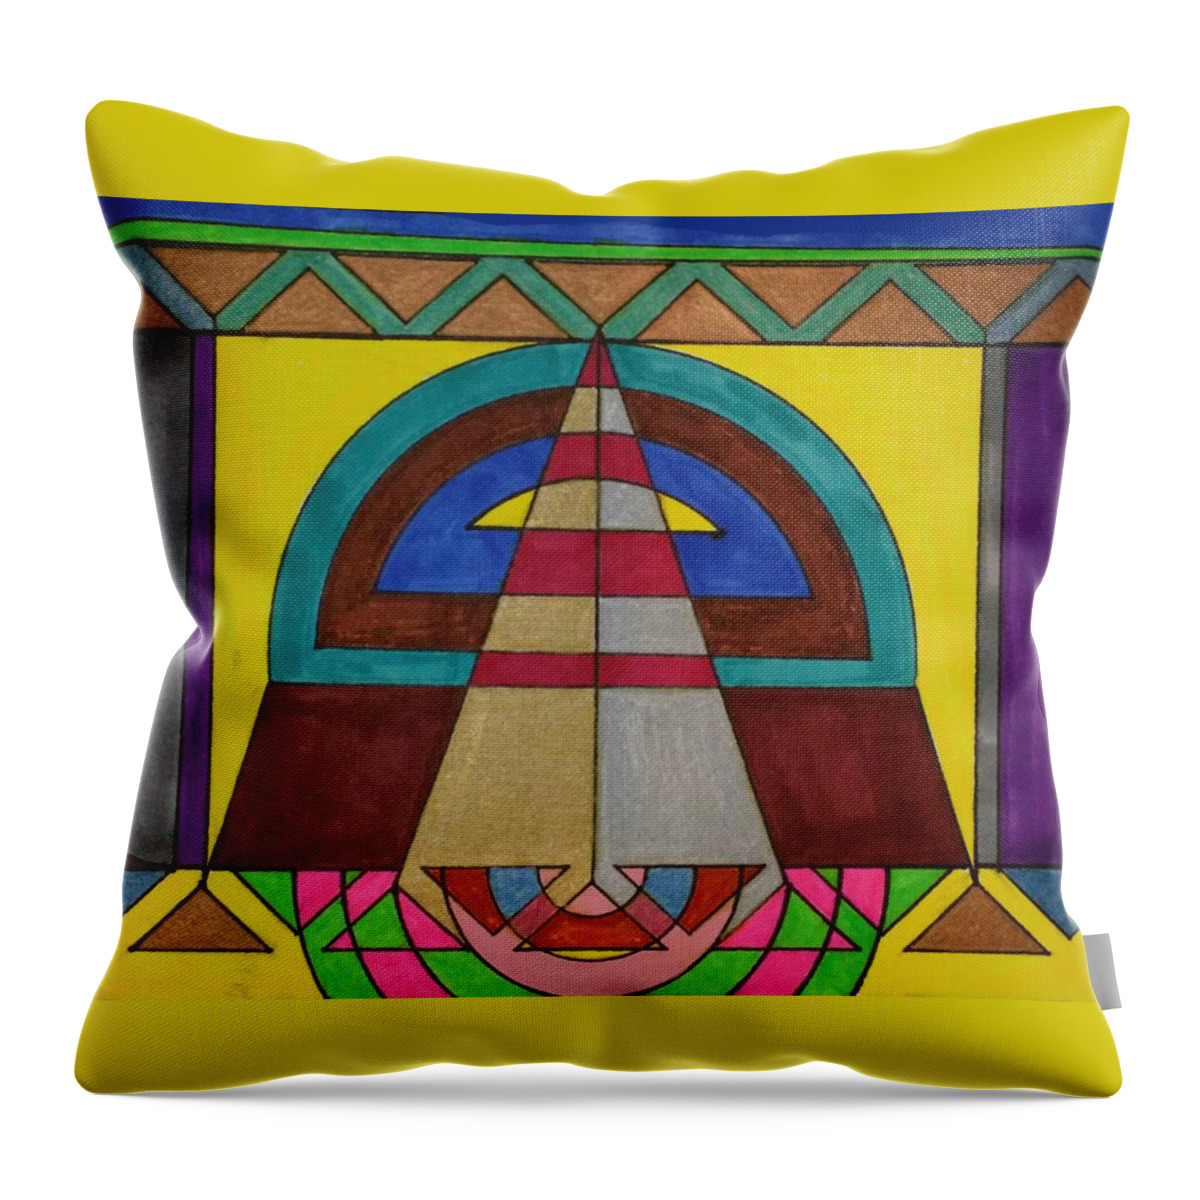 Geometric Art Throw Pillow featuring the glass art Dream 68 by S S-ray